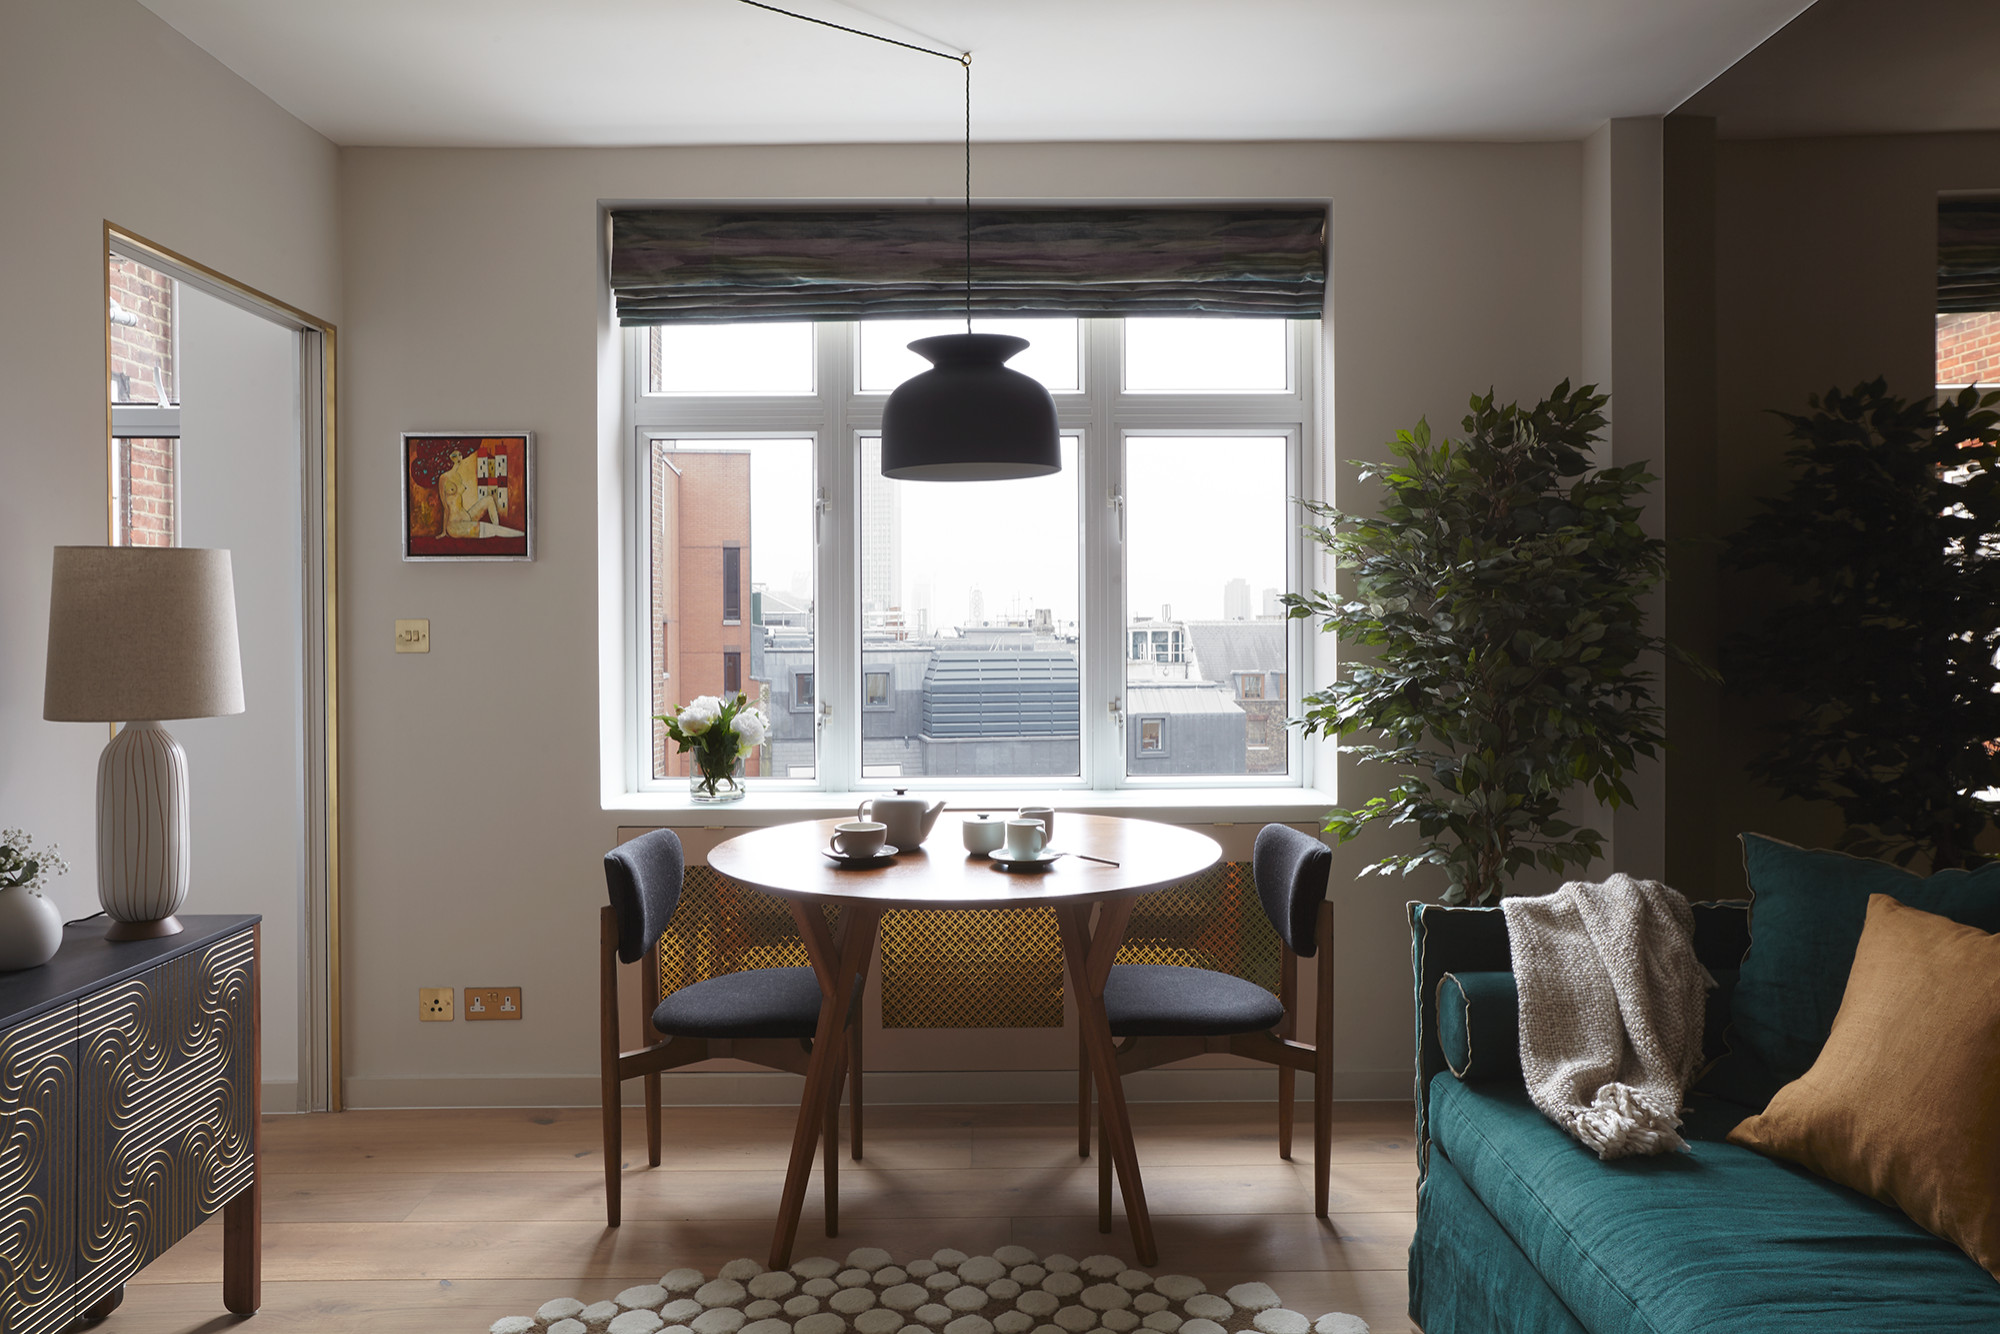 Houzz Tour: A One-bed London Flat Gets a Stylish New Look | Houzz UK